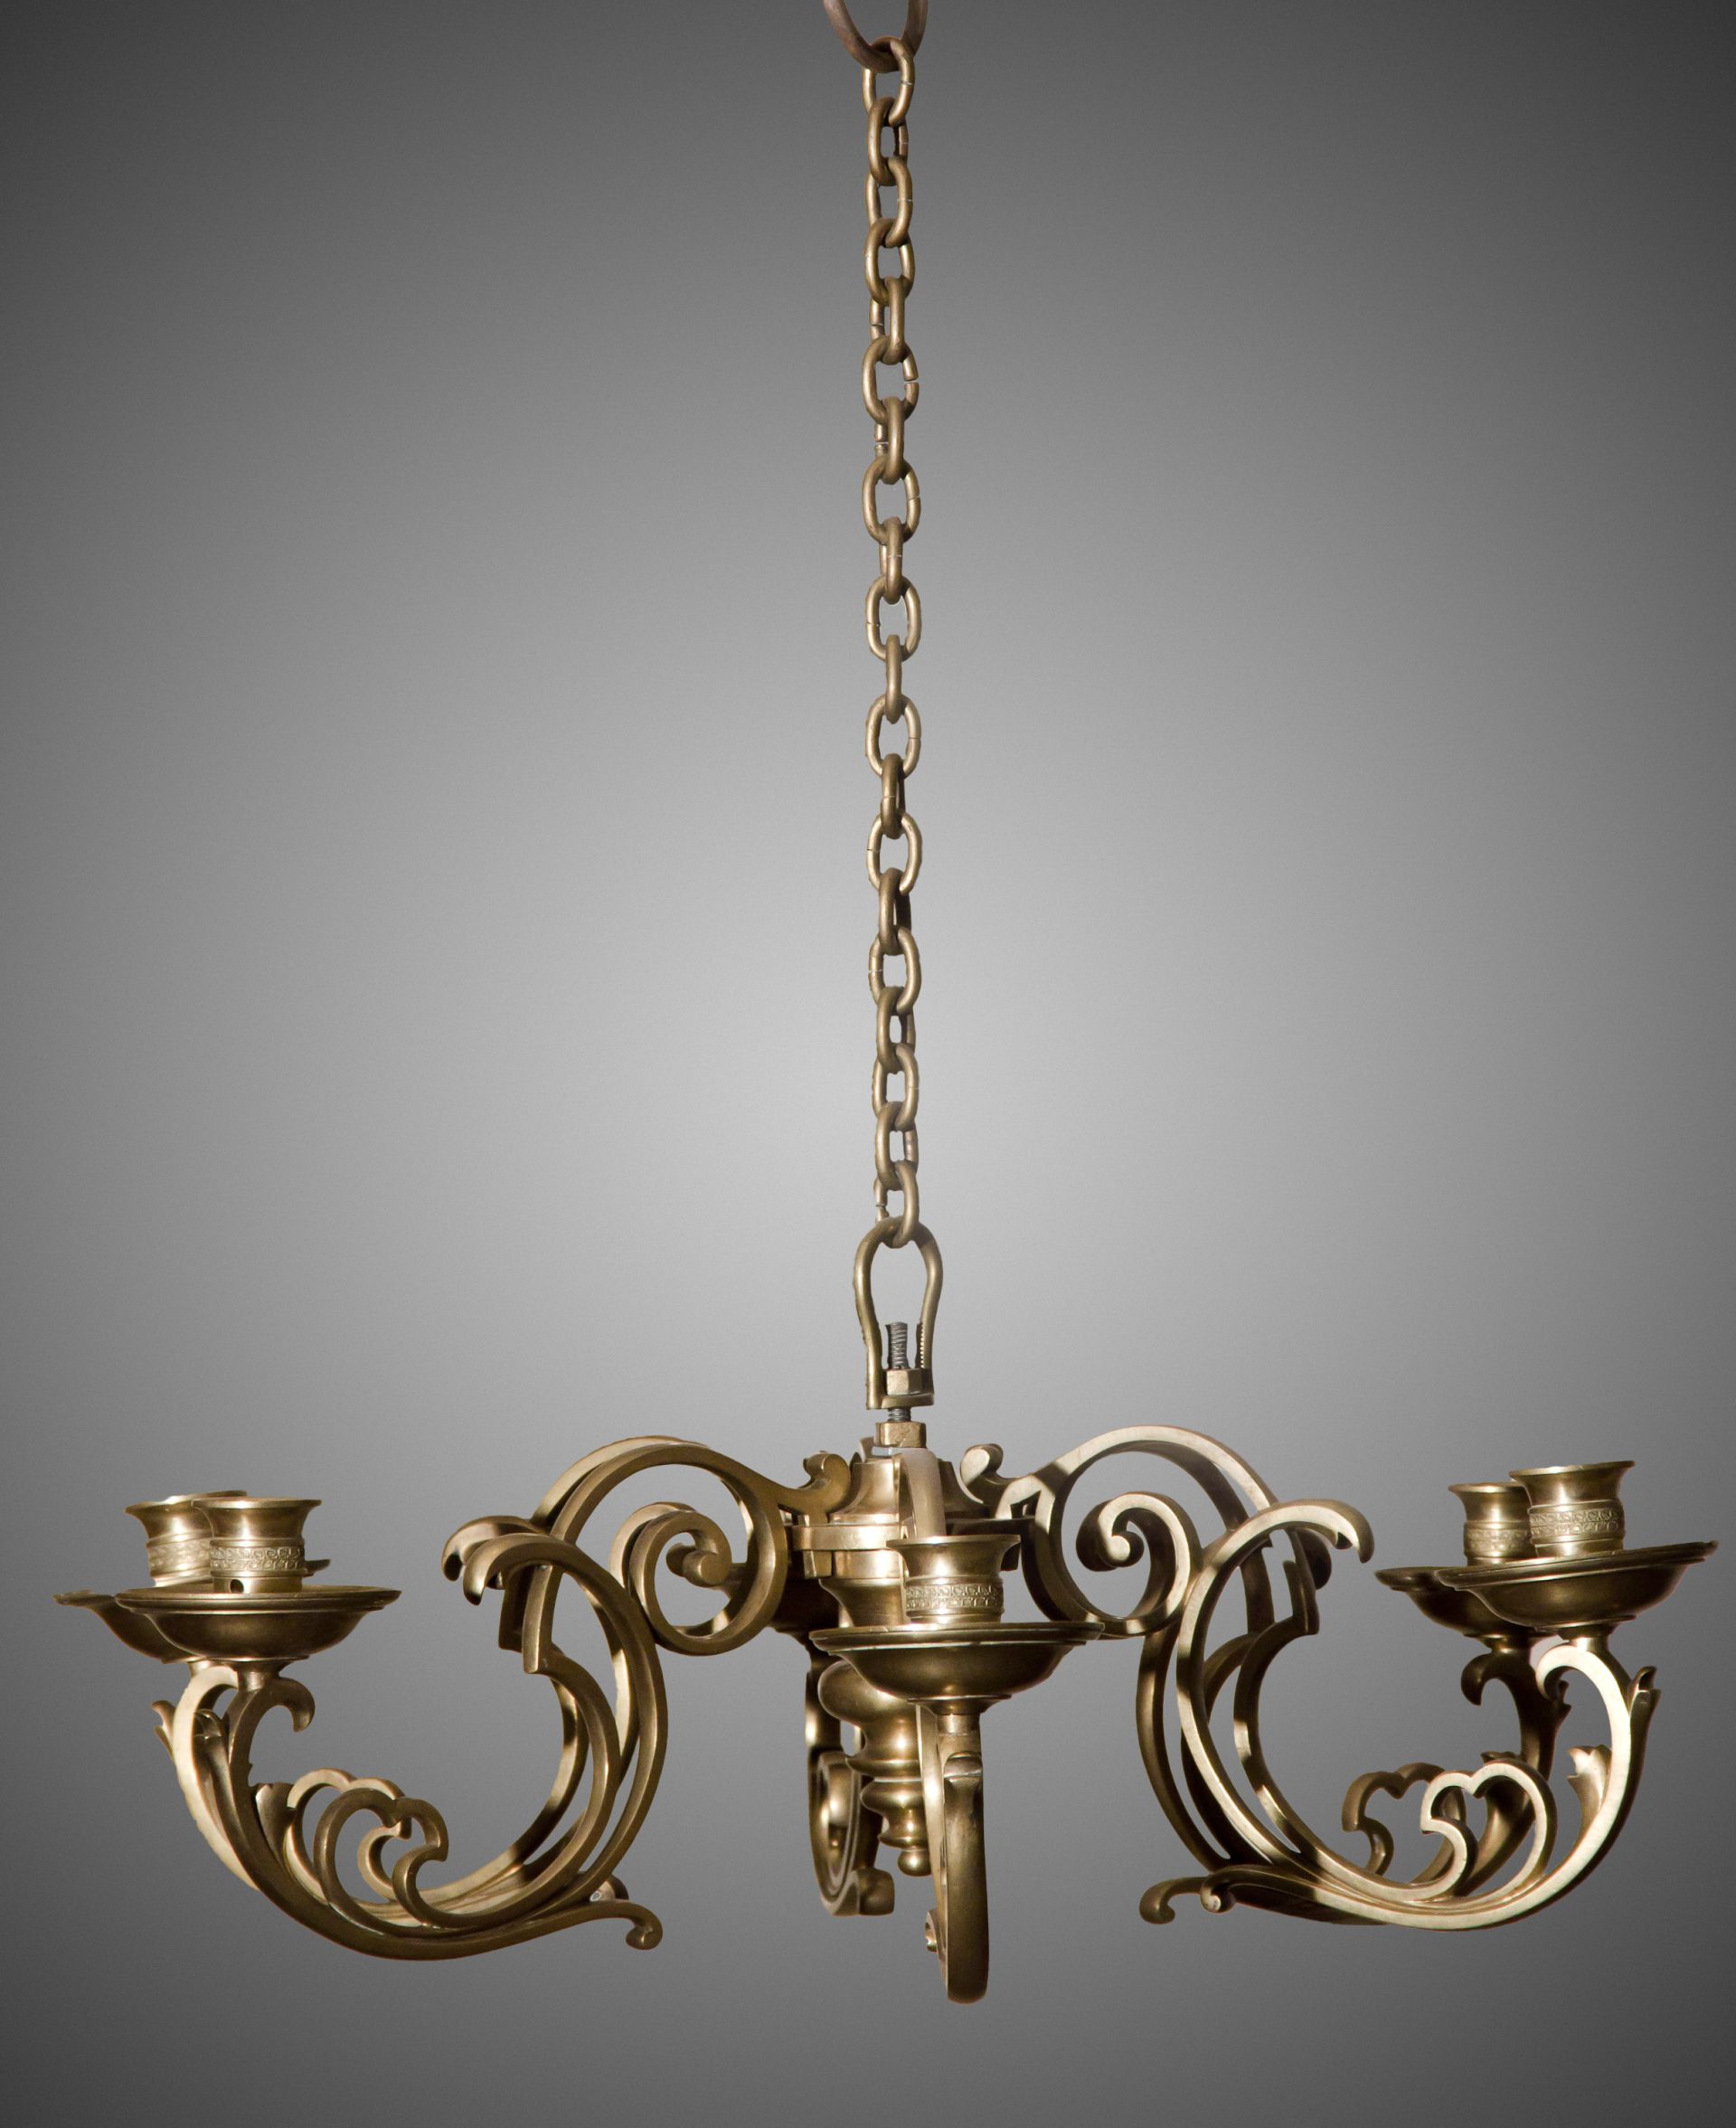 Chandelier, 1825–1875 (?), Lithuanian National Museum of Art, TM-2334. Photo by Tomas Kapočius, 2013